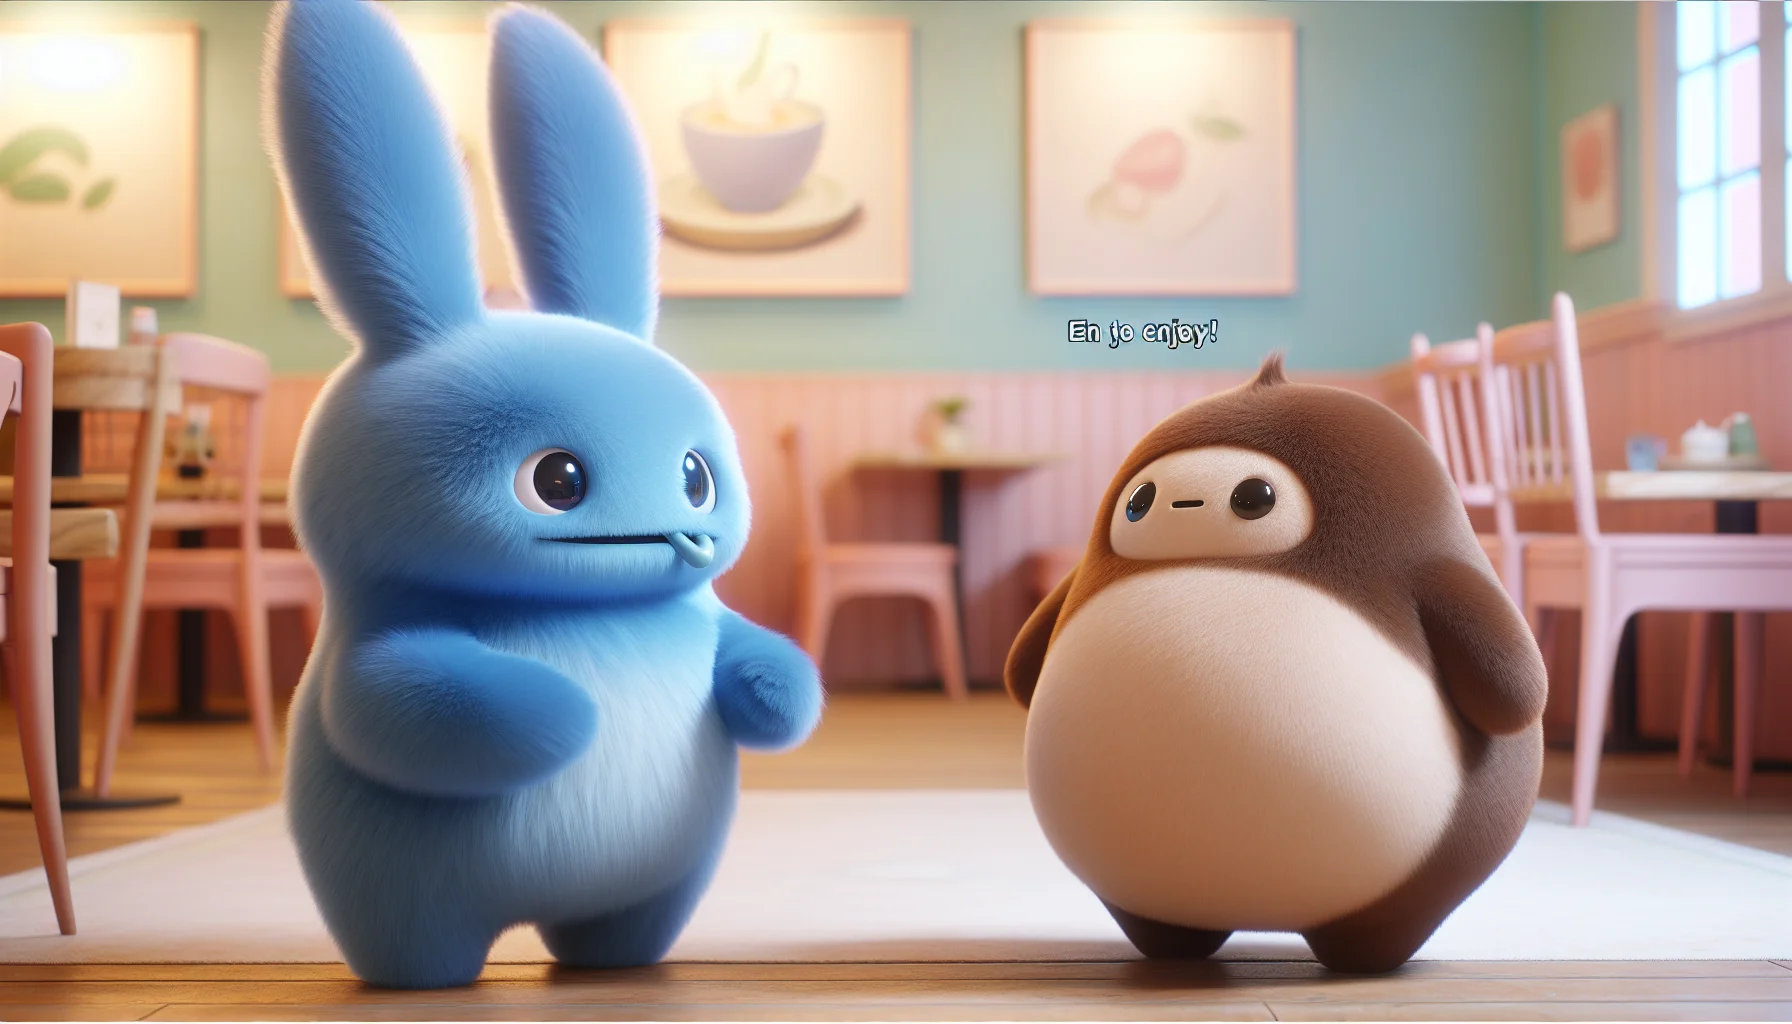 Create a realistic image showcasing a small, fluffy blue creature with long ears and a plump, round creature in brown, engaging in a humorous scenario that encourages people to enjoy. The blue creature seems to constantly bite its own tail forming an 'O' shape and seems innocent yet energetic, while the brown creature seems to carry a relaxed and calm demeanor with cutely droopy ears. The setting is an inviting, pastel-themed cafe with soft colors.